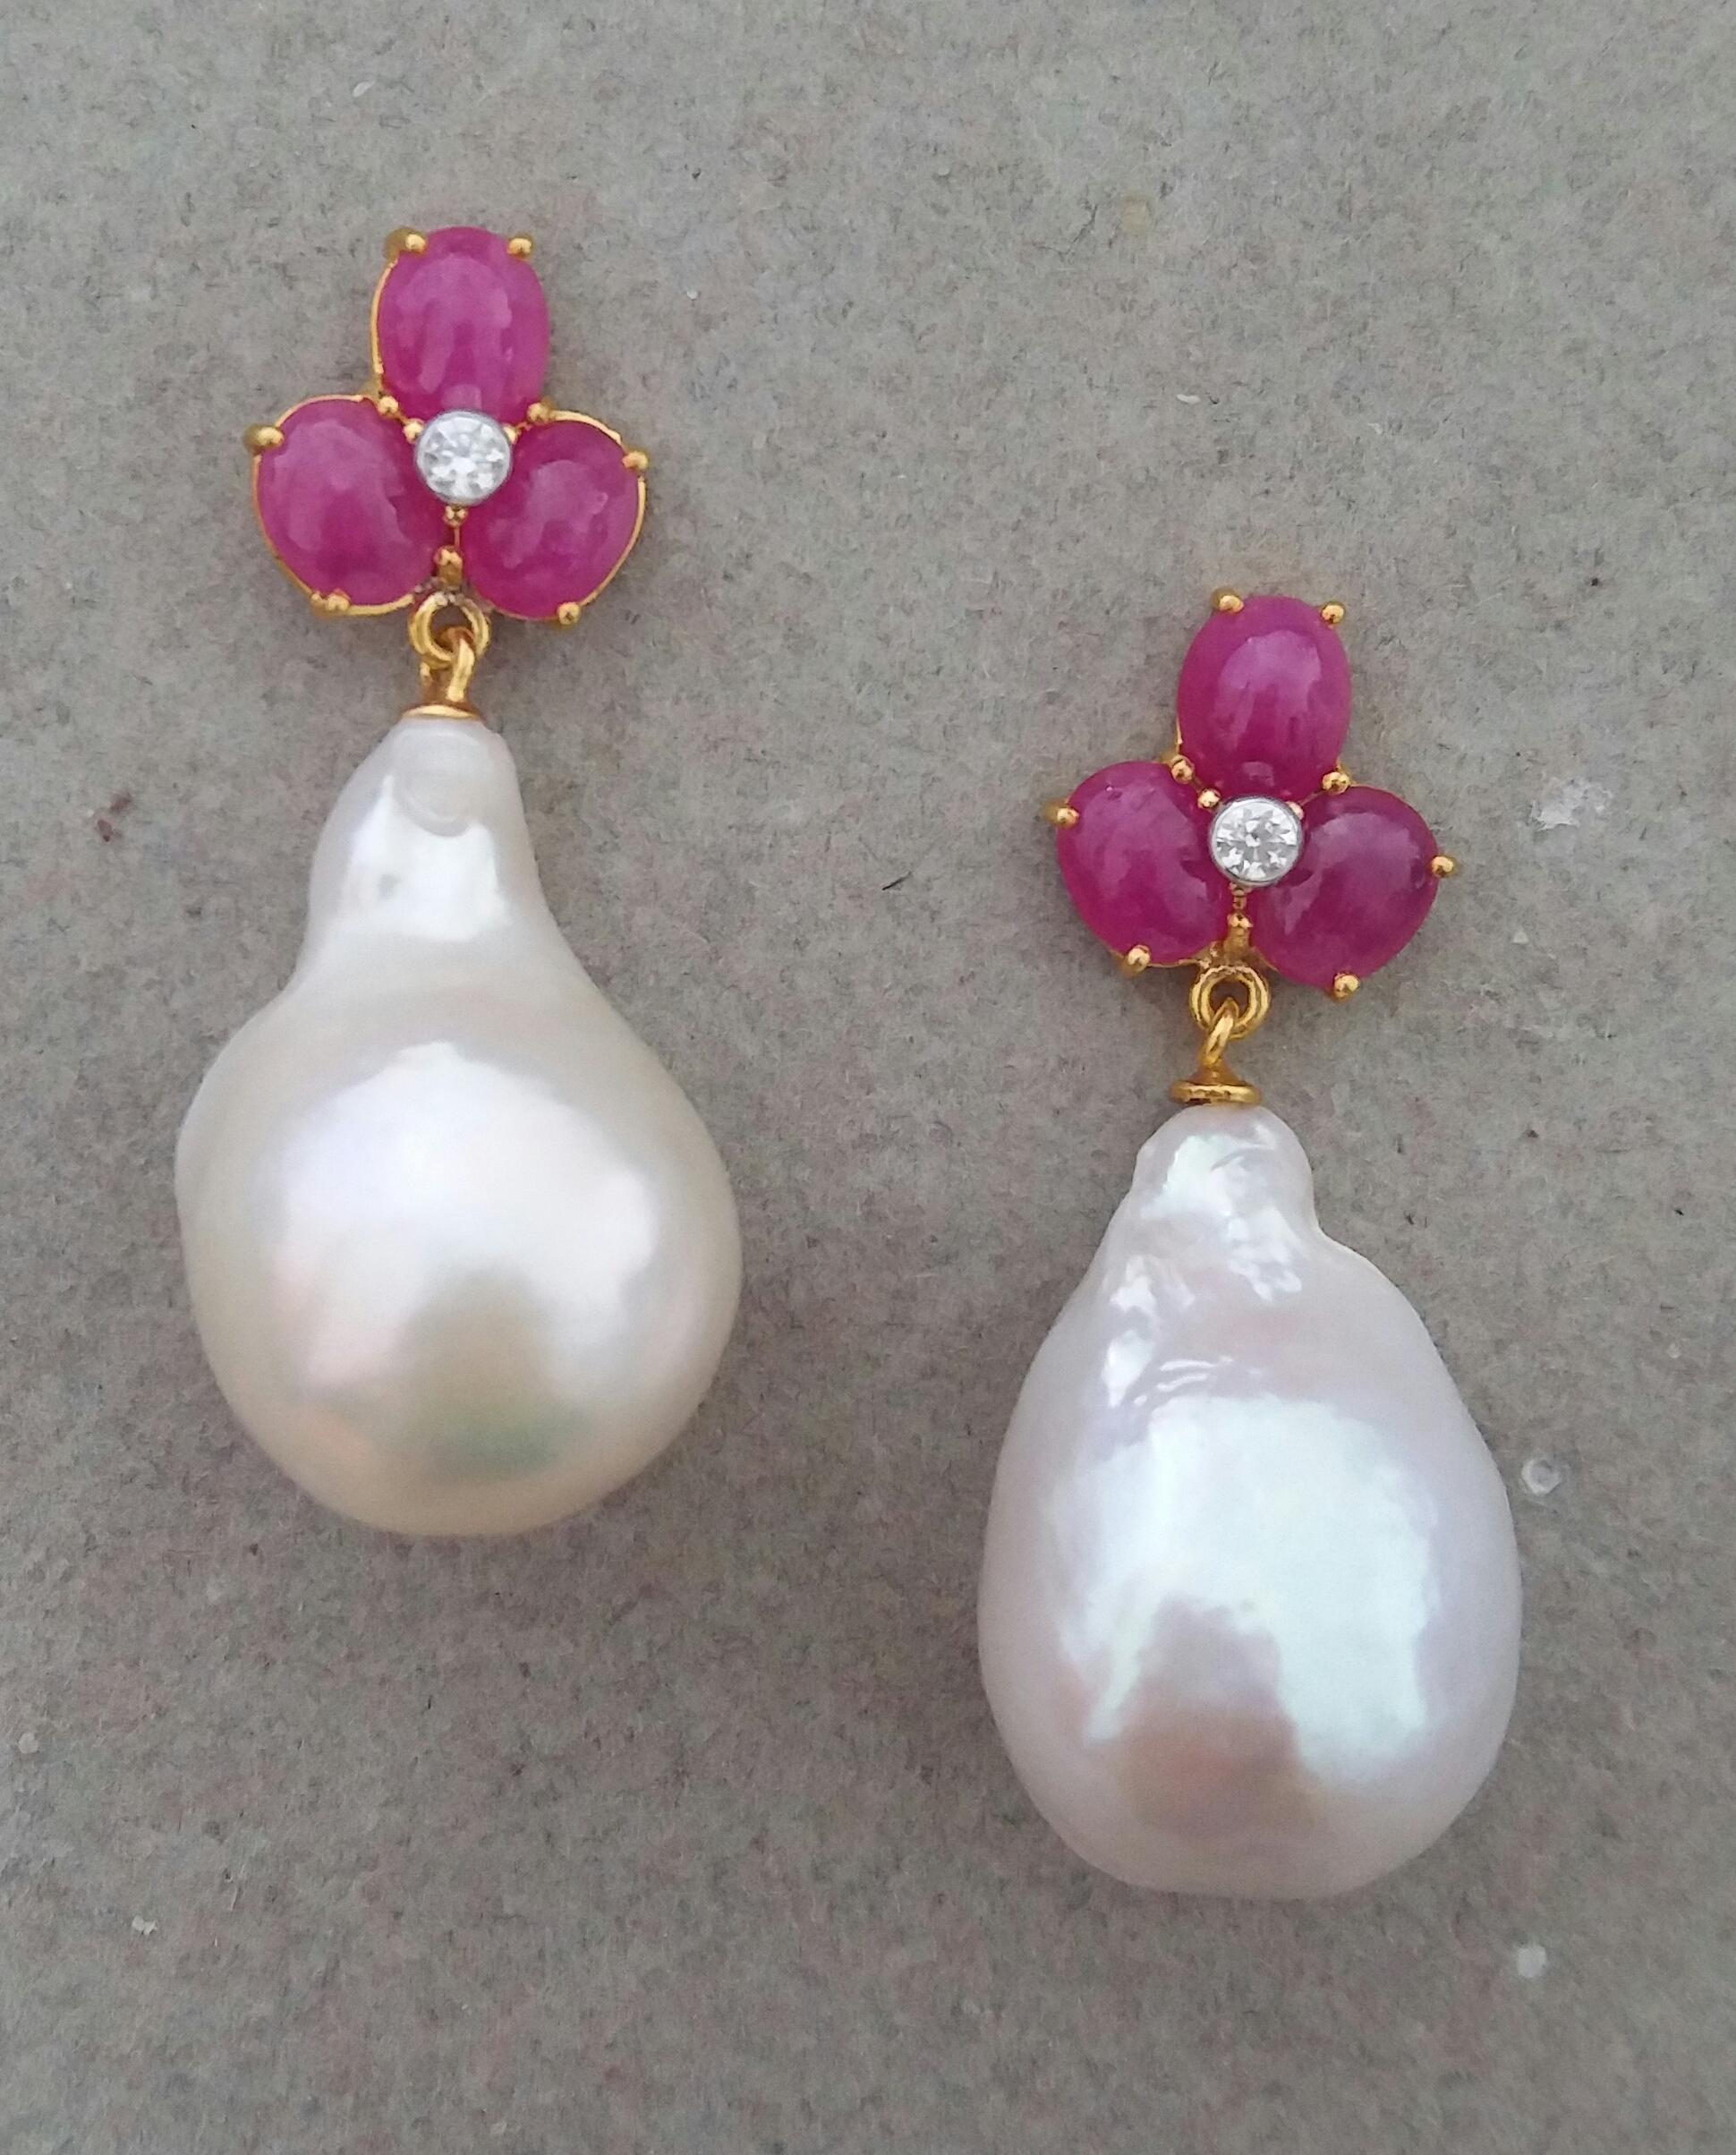 Elegant and completely handmade Earrings consisting of an upper part of 3 oval shape Ruby cabs of 4 mm x 5 mm set together in 14 Kt yellow gold with 2 small diamonds in the center, at the bottom 2 nice big size white color and high luster Pear Shape